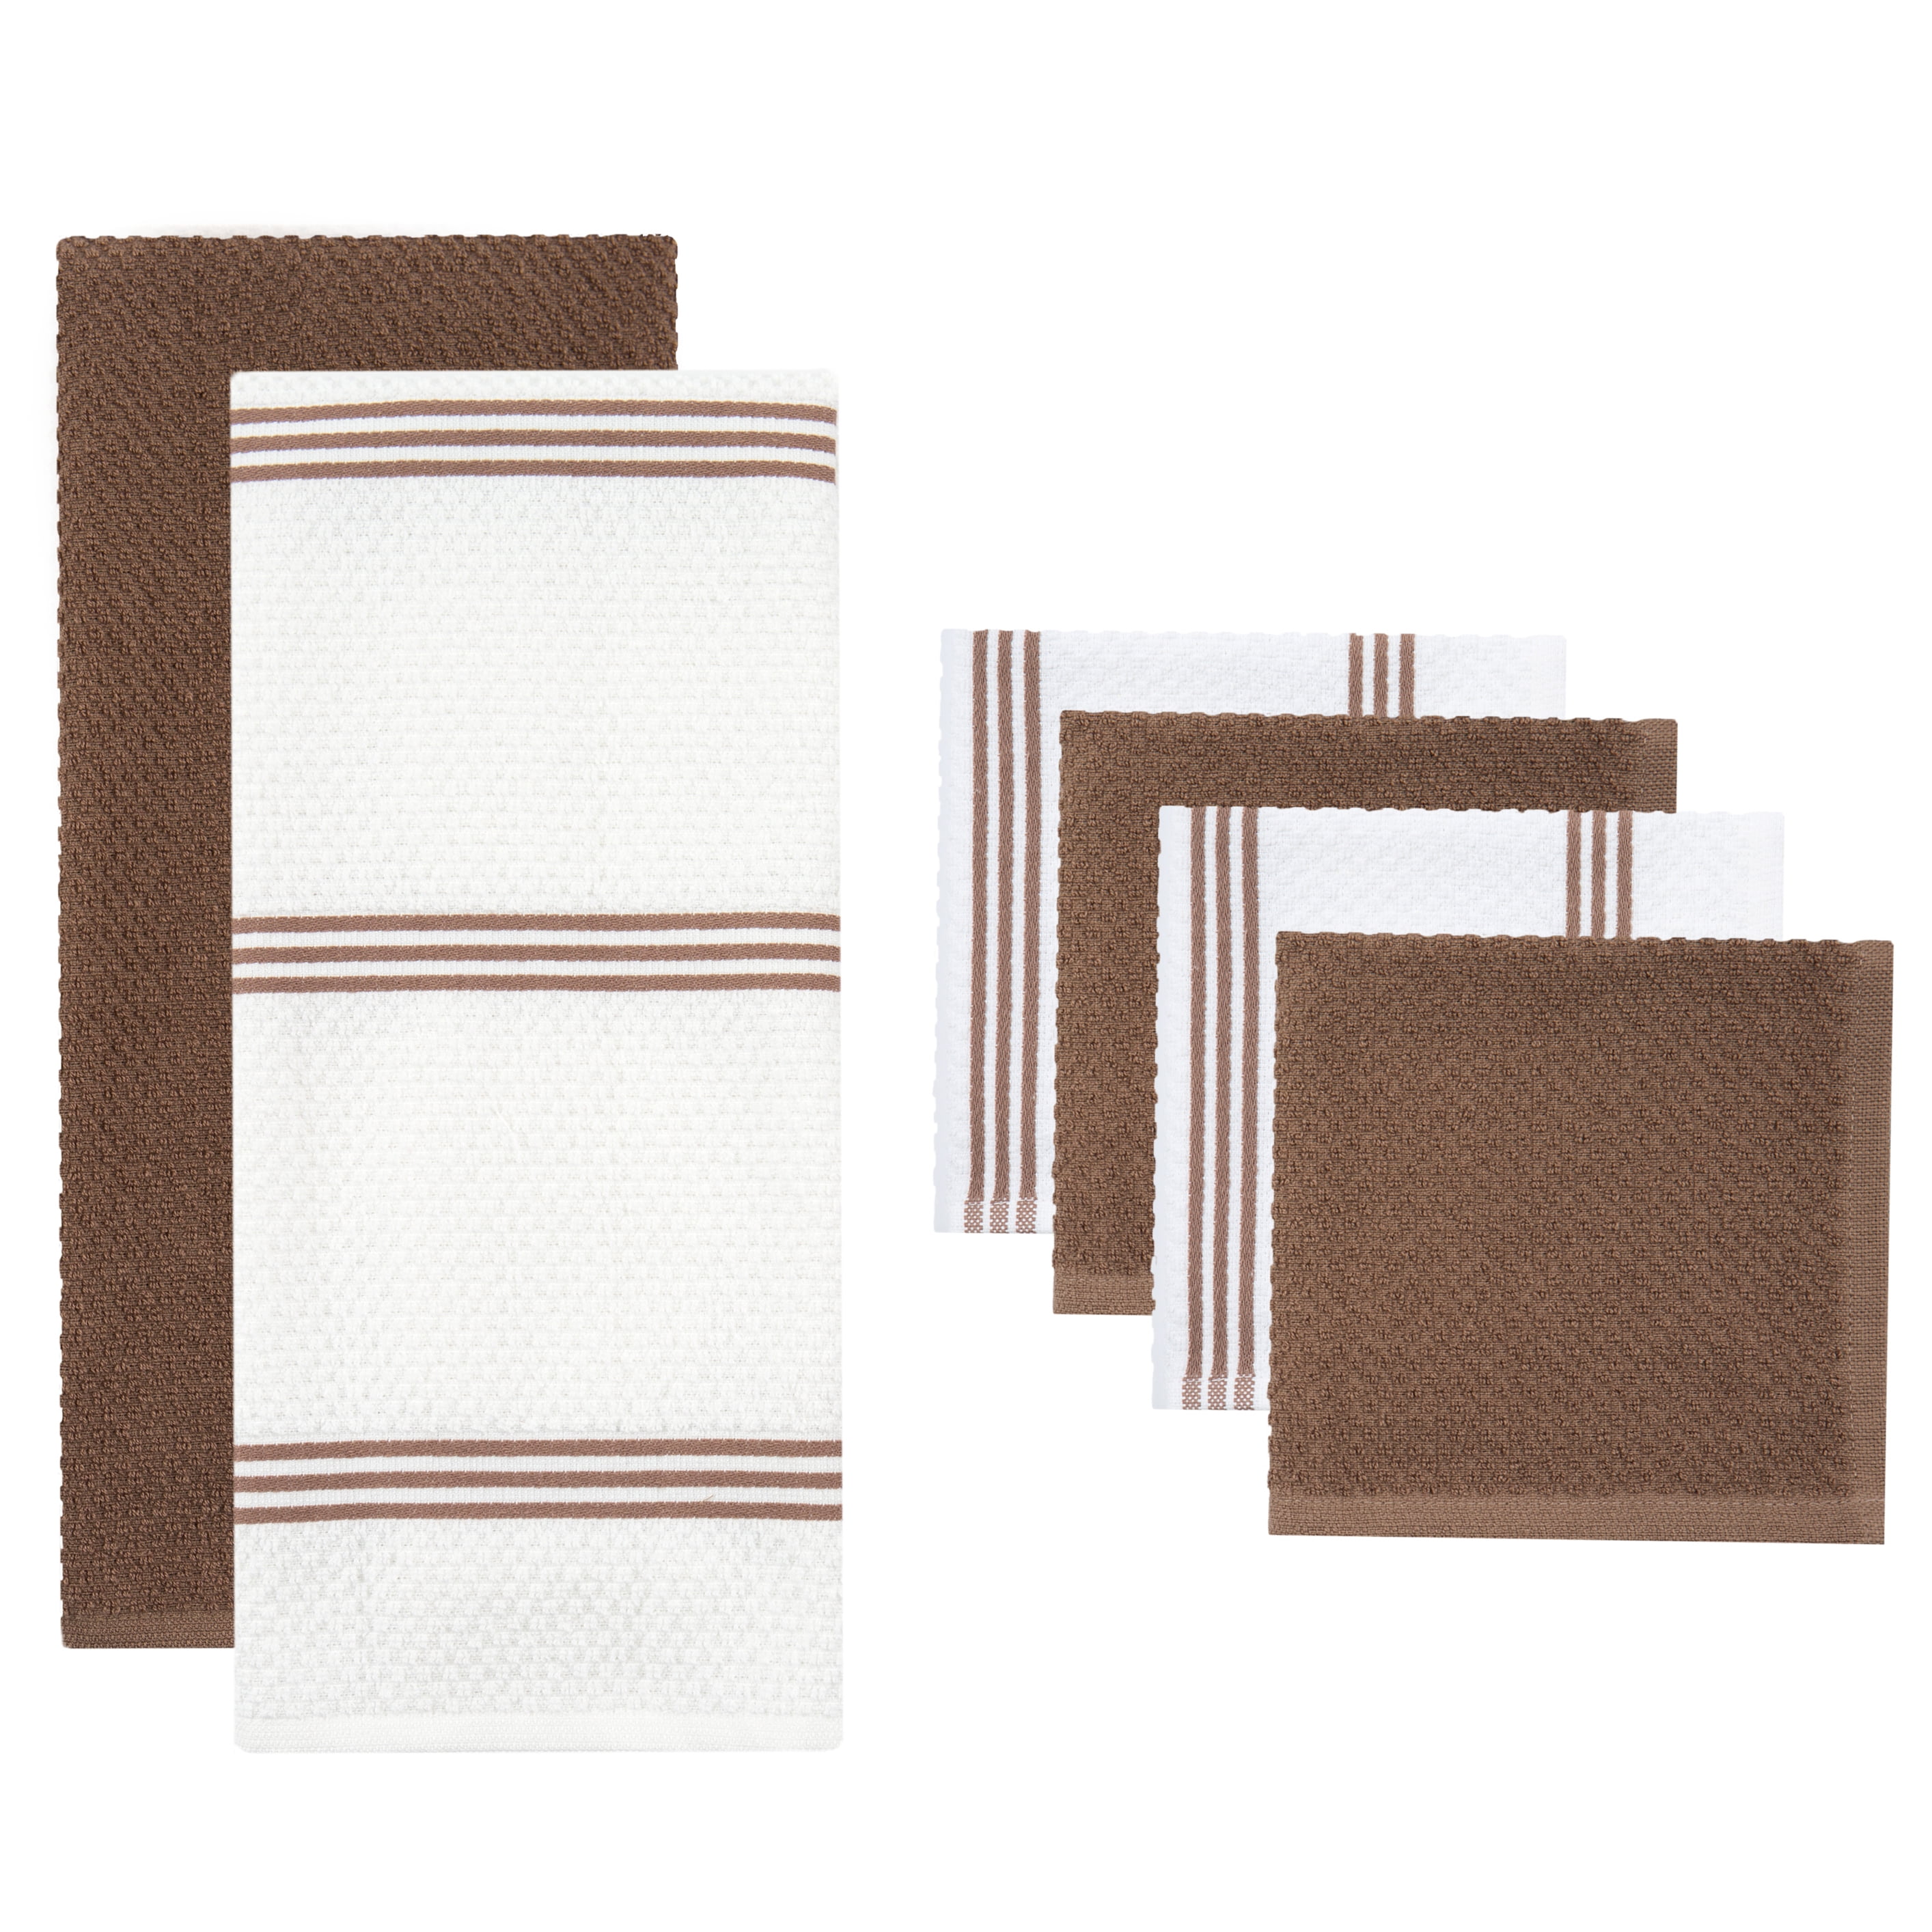 16 x 28 inches Soft Absorbent Restaurant Bar Glass Kitchen Cloths 4 Pack of Kitchen Towels 40.6 x 71 cms | Blue Sticky Toffee 100% Cotton Terry Tea Towels 